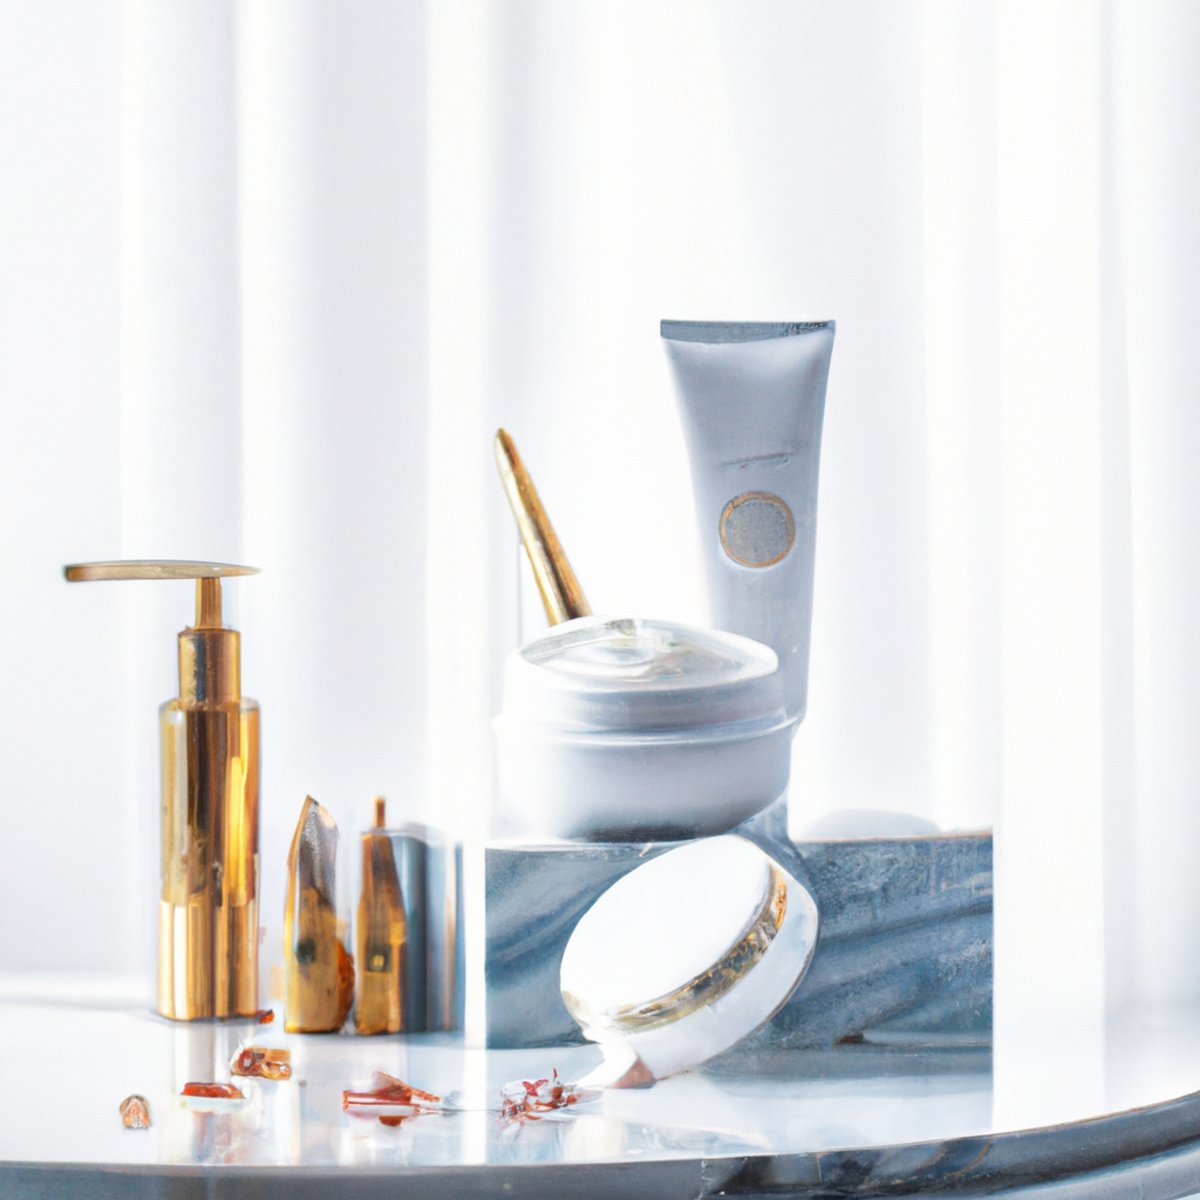 A luxurious vanity table with anti-aging skincare products, including retinol cream, derma roller, hyaluronic acid serum, and plants.